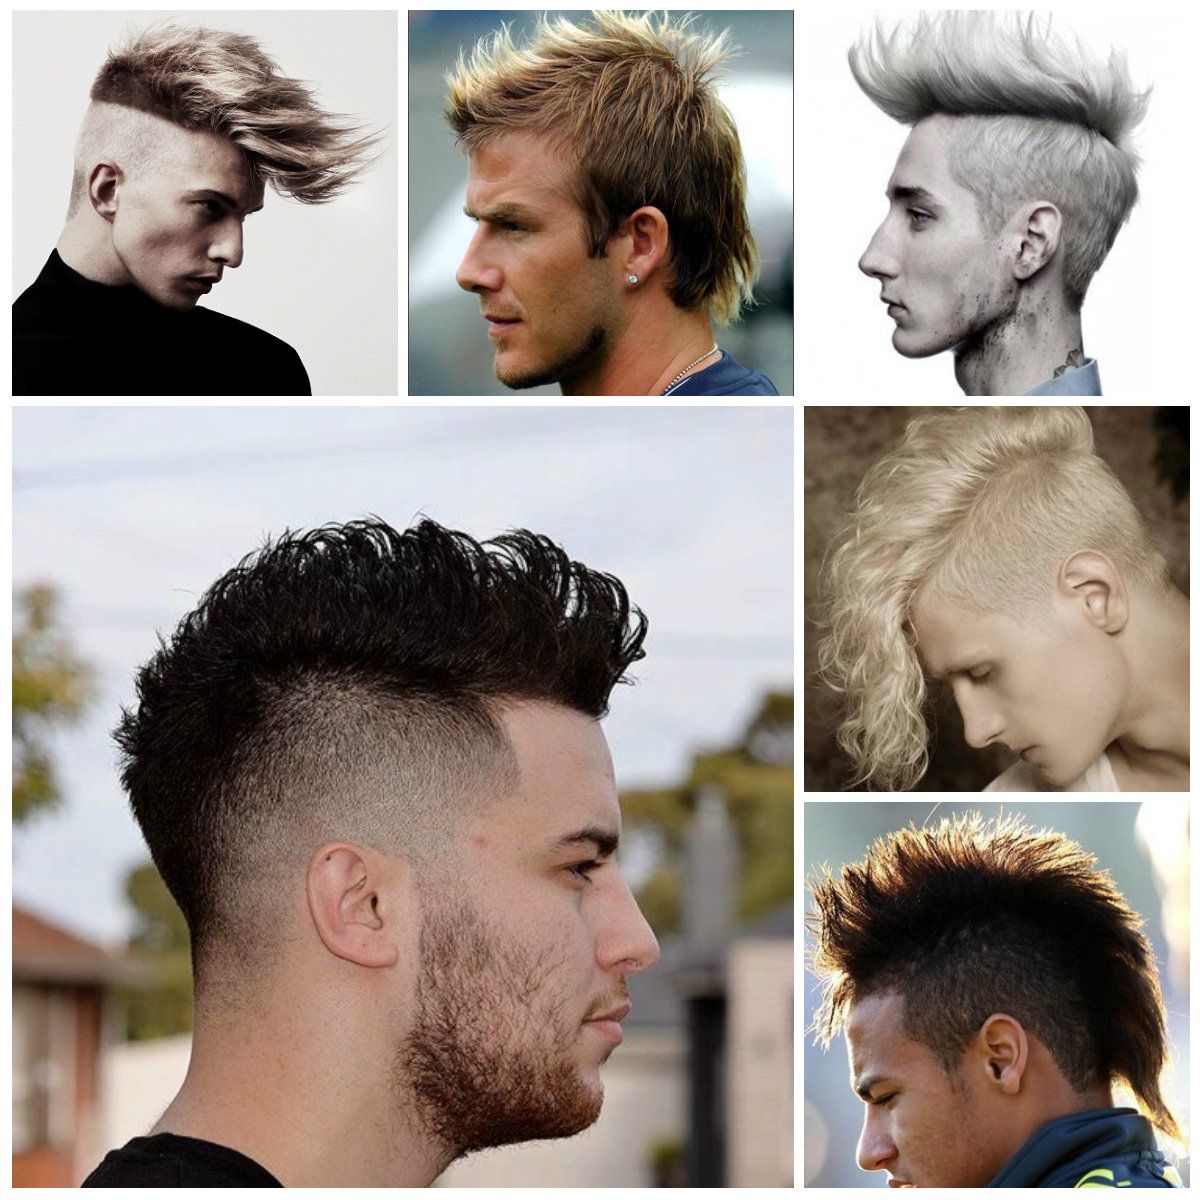 2019 Trendy Mohawk Hairstyles For Men – Best Hairstyles Pertaining To Widely Used Short Hair Inspired Mohawk Hairstyles (View 19 of 20)